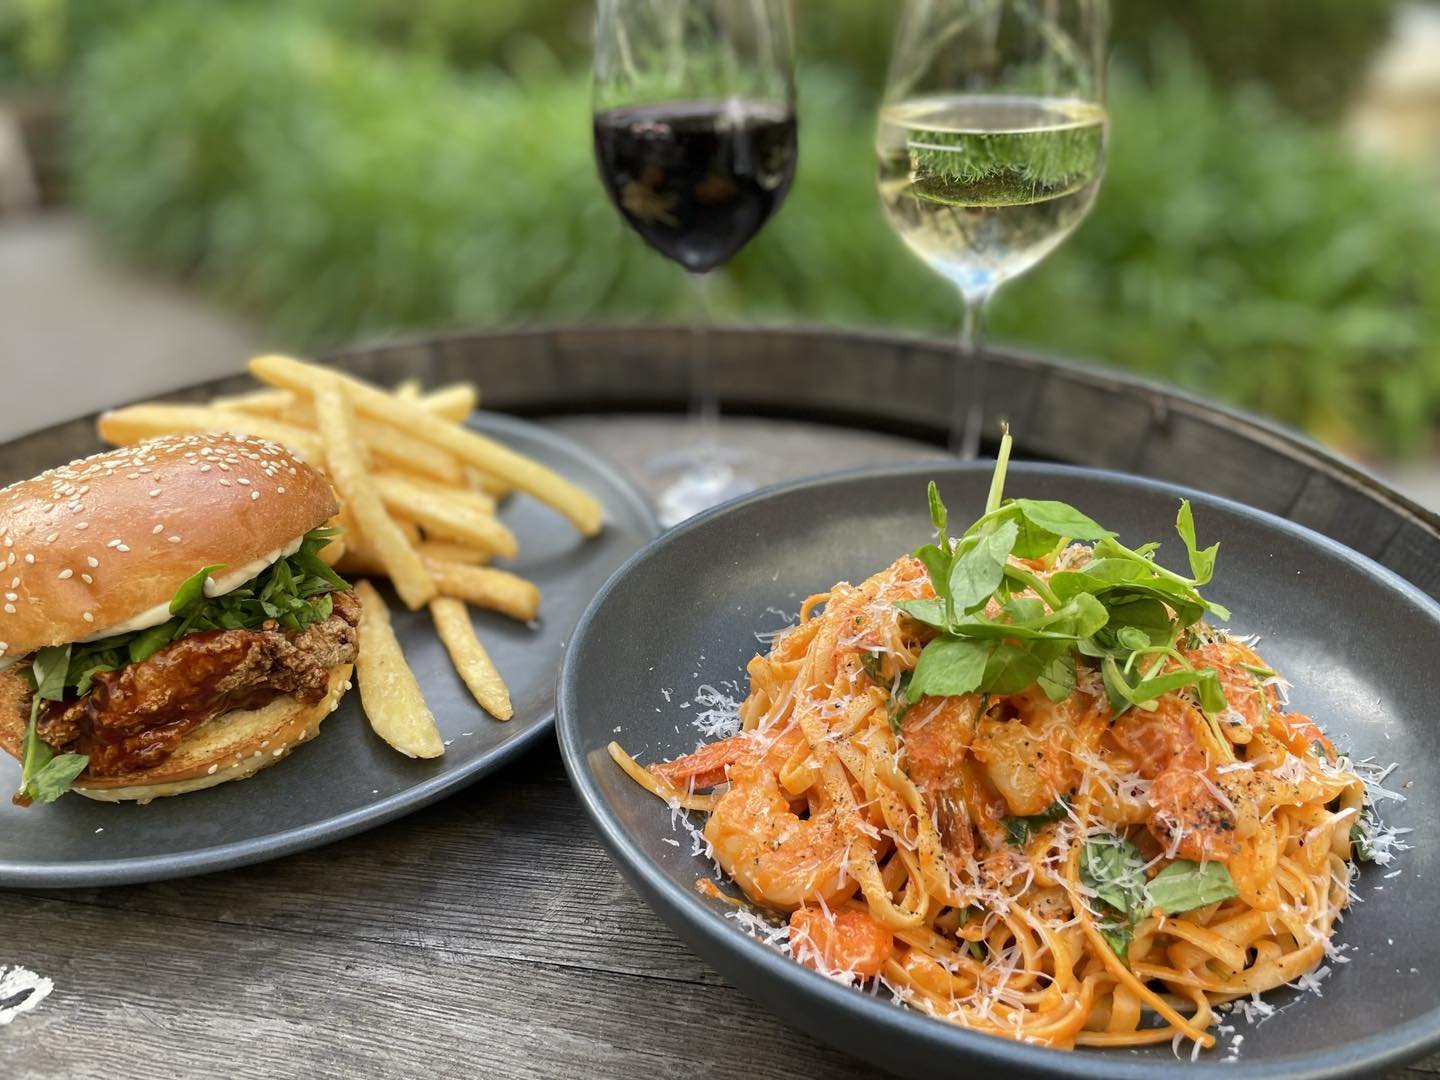 Feeling a little sluggish post the Easter long weekend? Why not start the week with lunch @treasury1860. Grab a weekly burger or pasta special and a pint of lager or glass of house wine for just $25!

Seriously #goodvalue #lunchspecial in a seriously